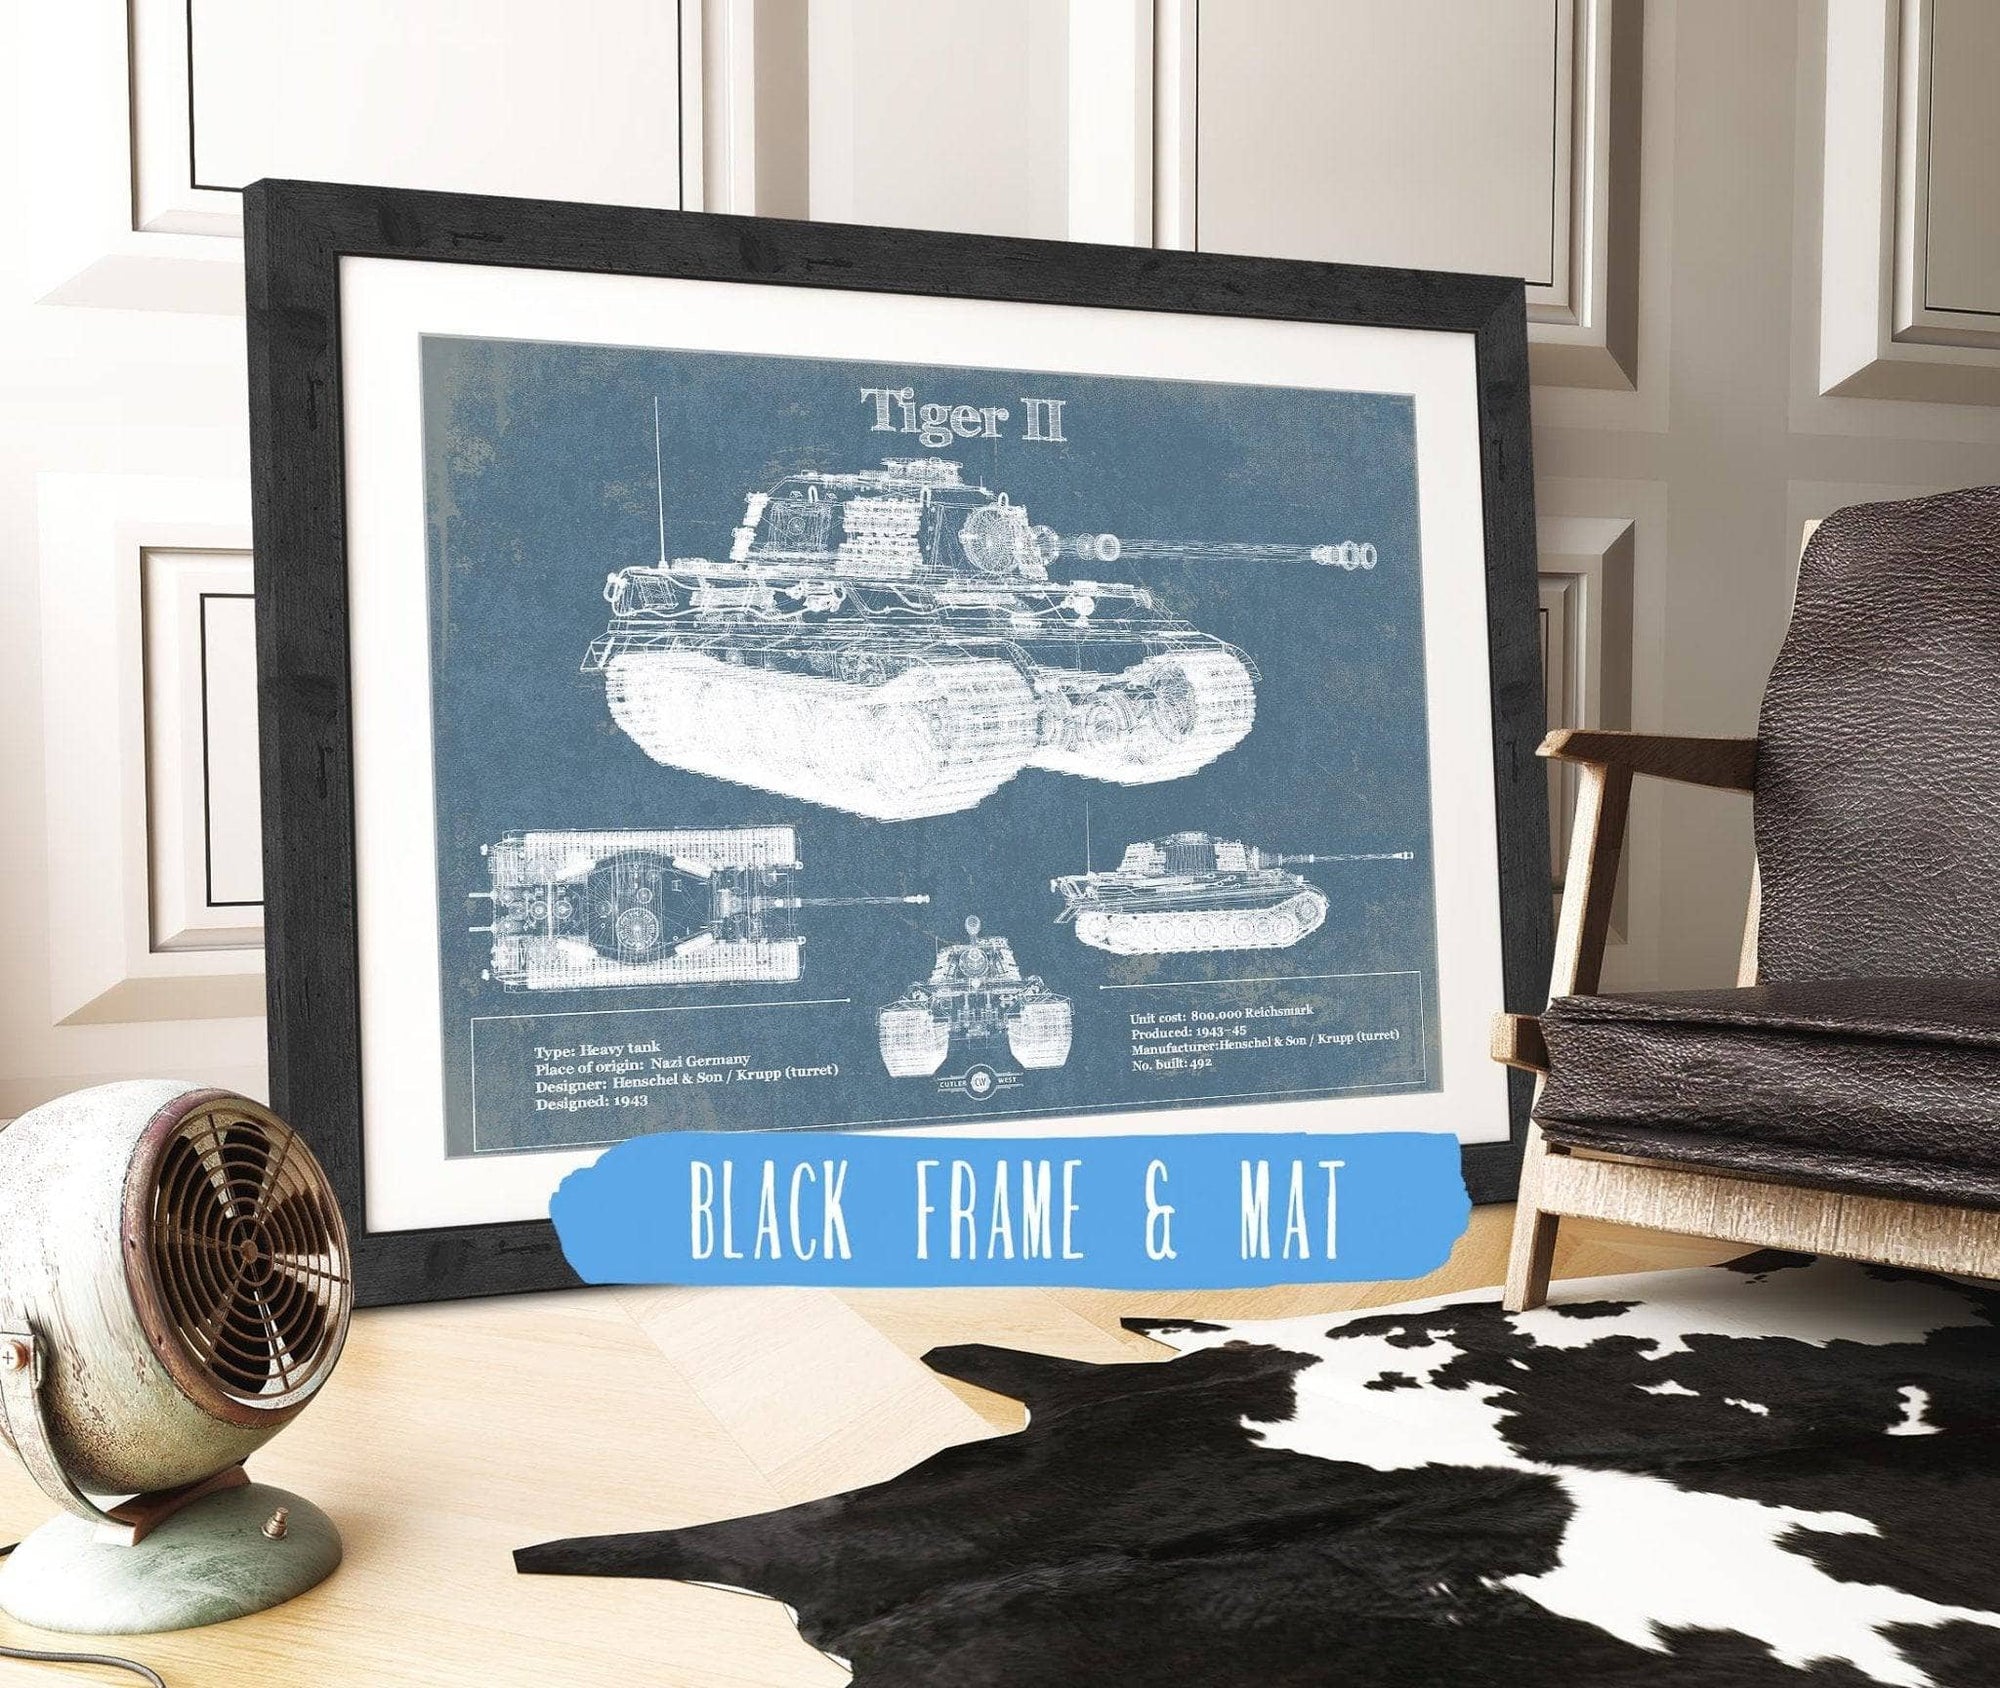 Cutler West Military Weapons Collection 14" x 11" / Black Frame & Mat Tiger II Vintage German Tank Military Print 845000232_24666